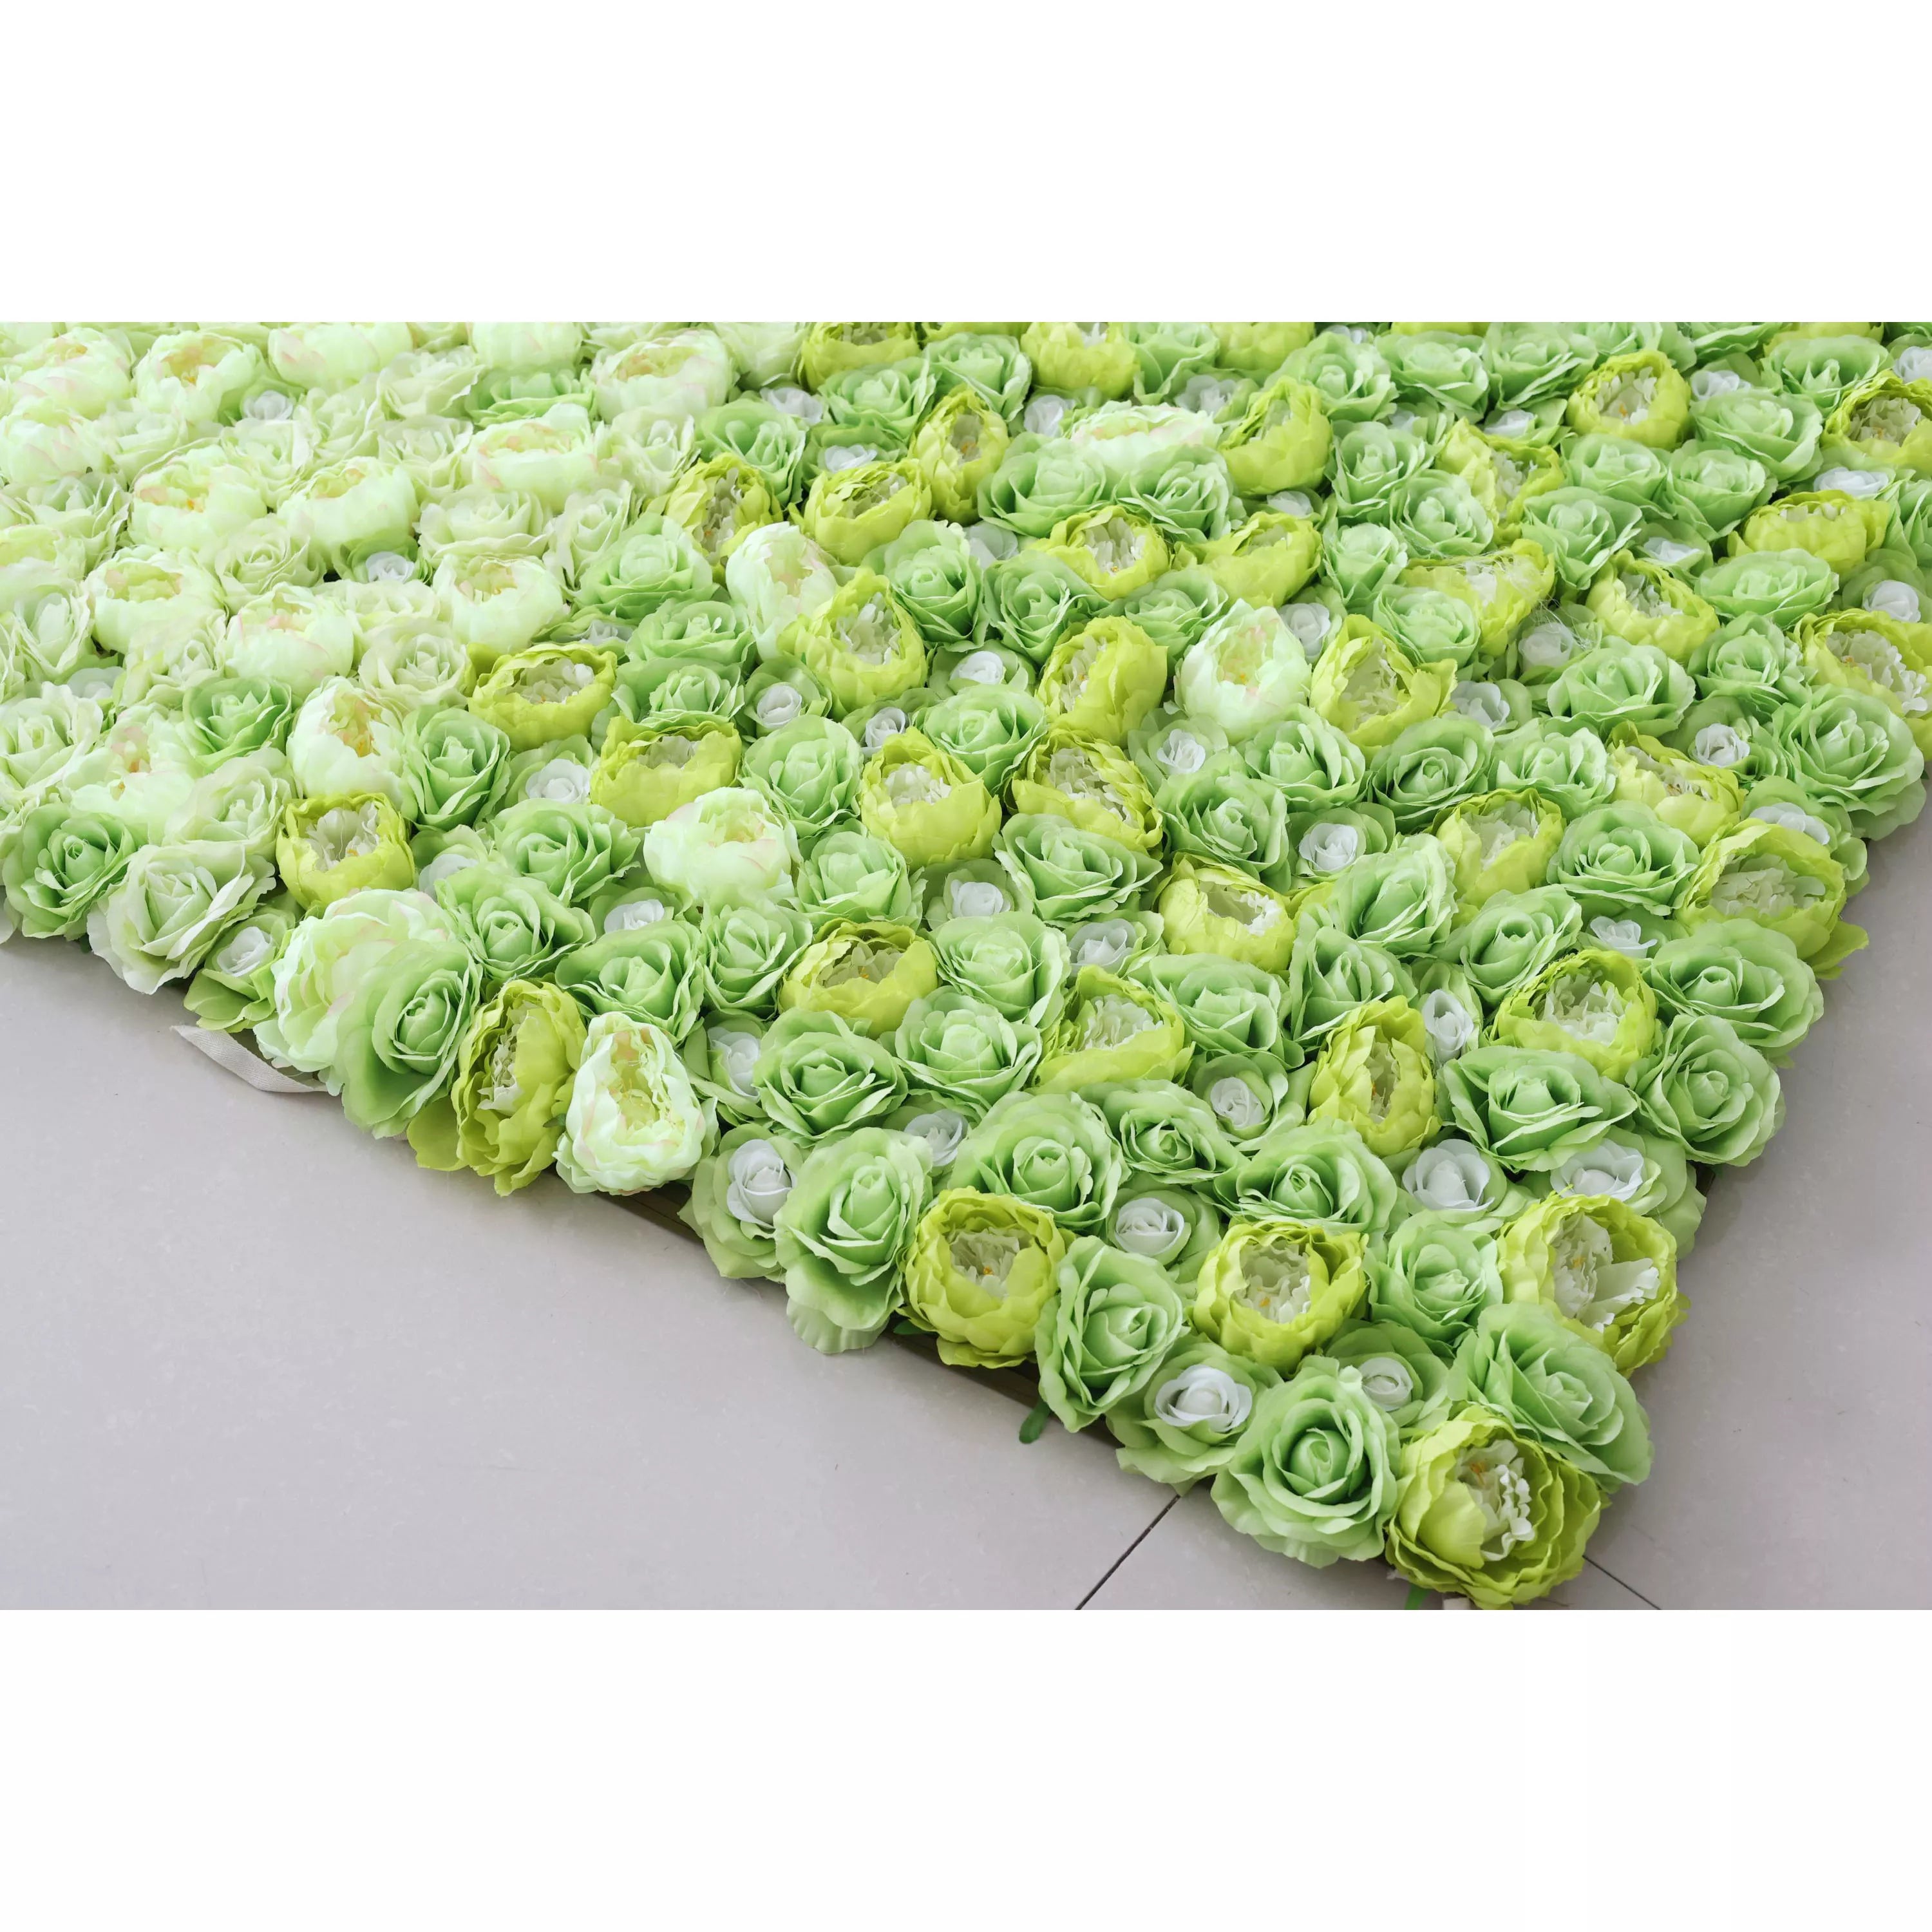 ValarFlowers Artificial Floral Wall Backdrop: Serene Spring Gradient - A Gentle Transition from Lime Lush to Crystal Clear-VF-249